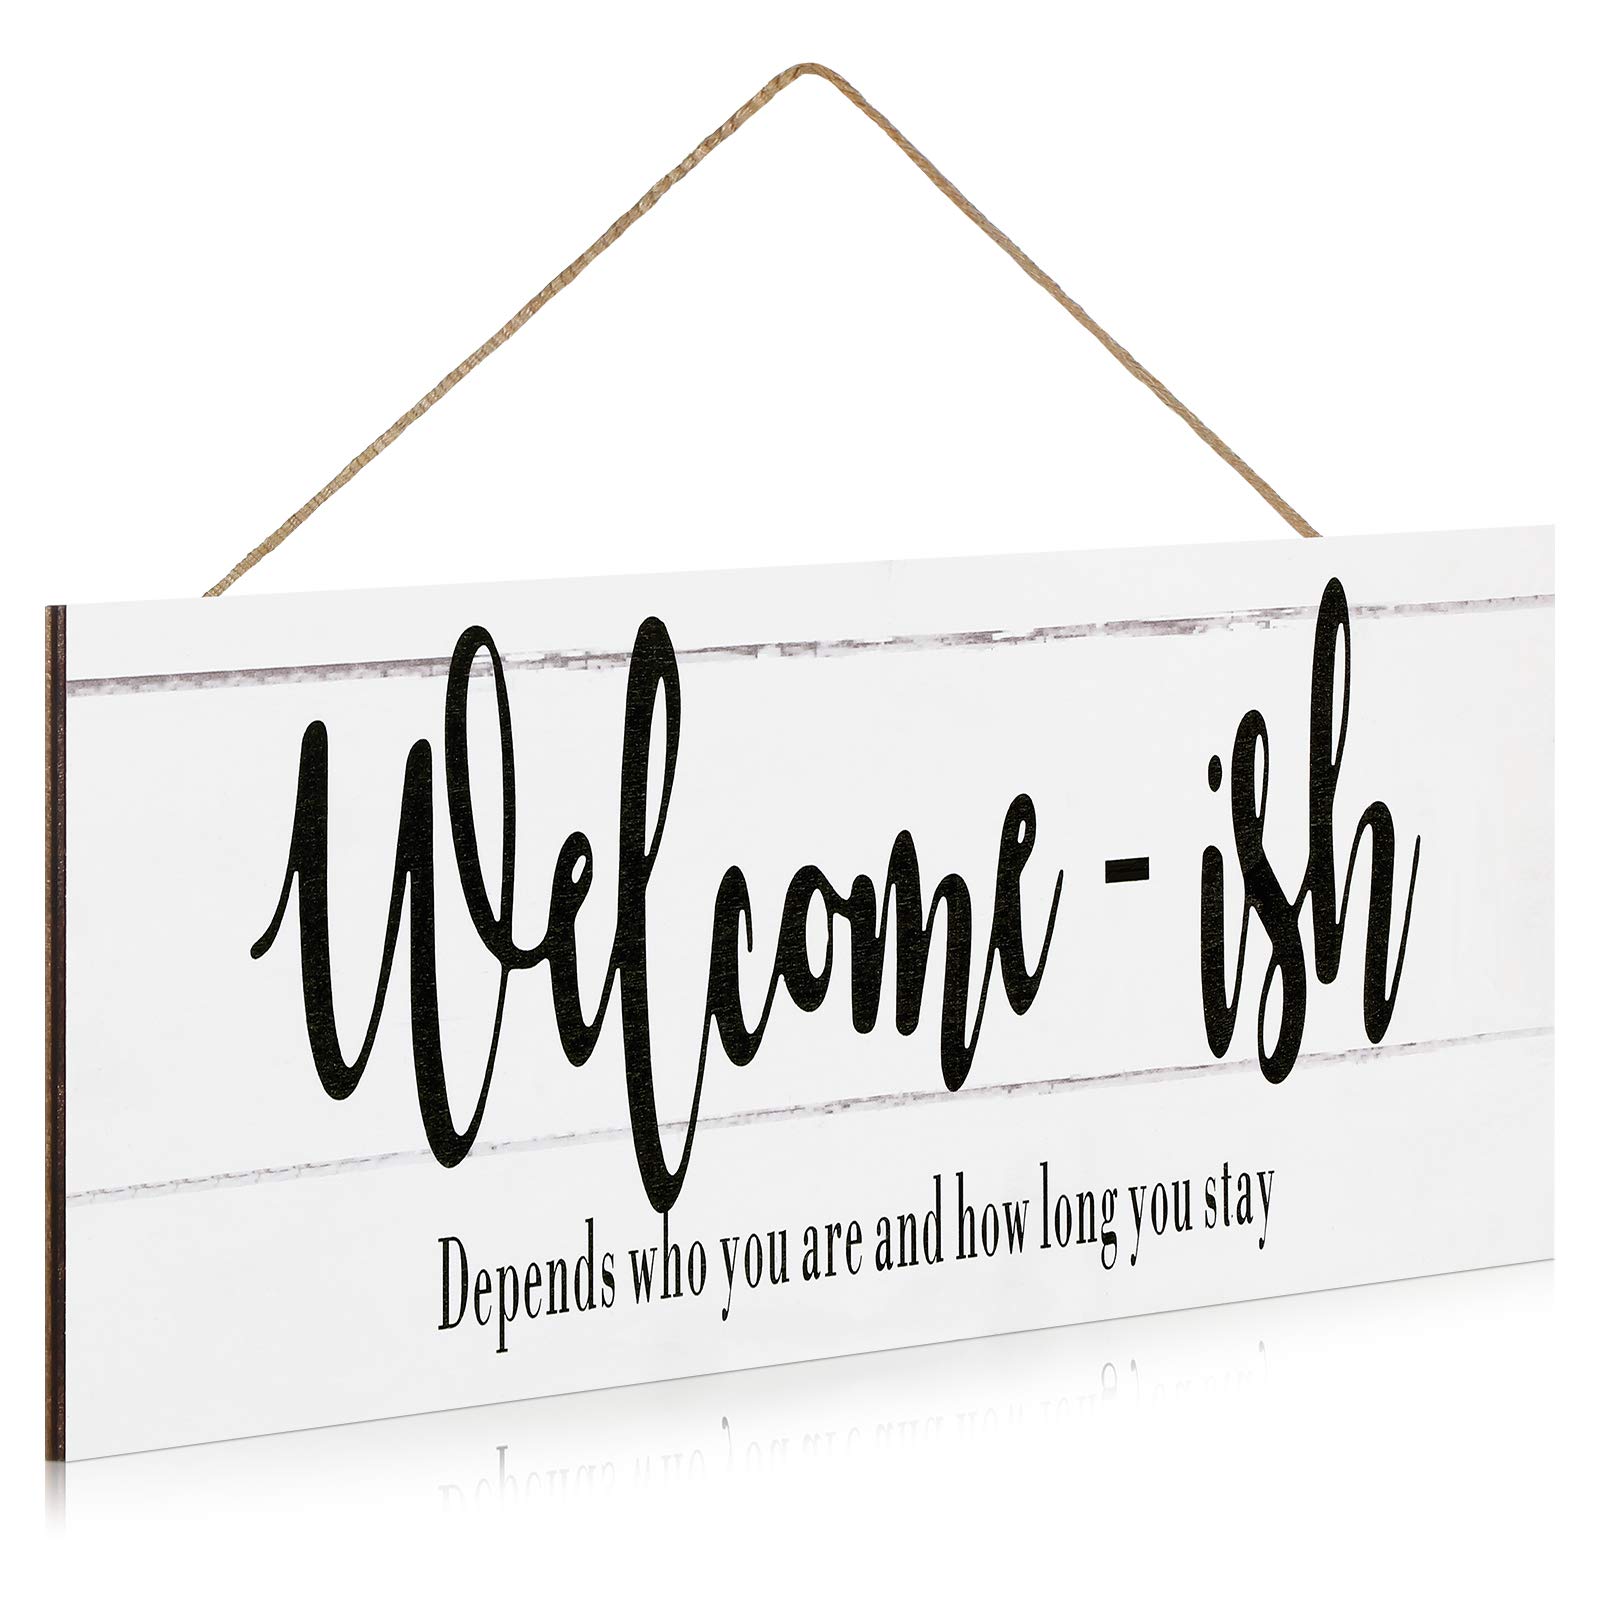 Welcome sign with rules